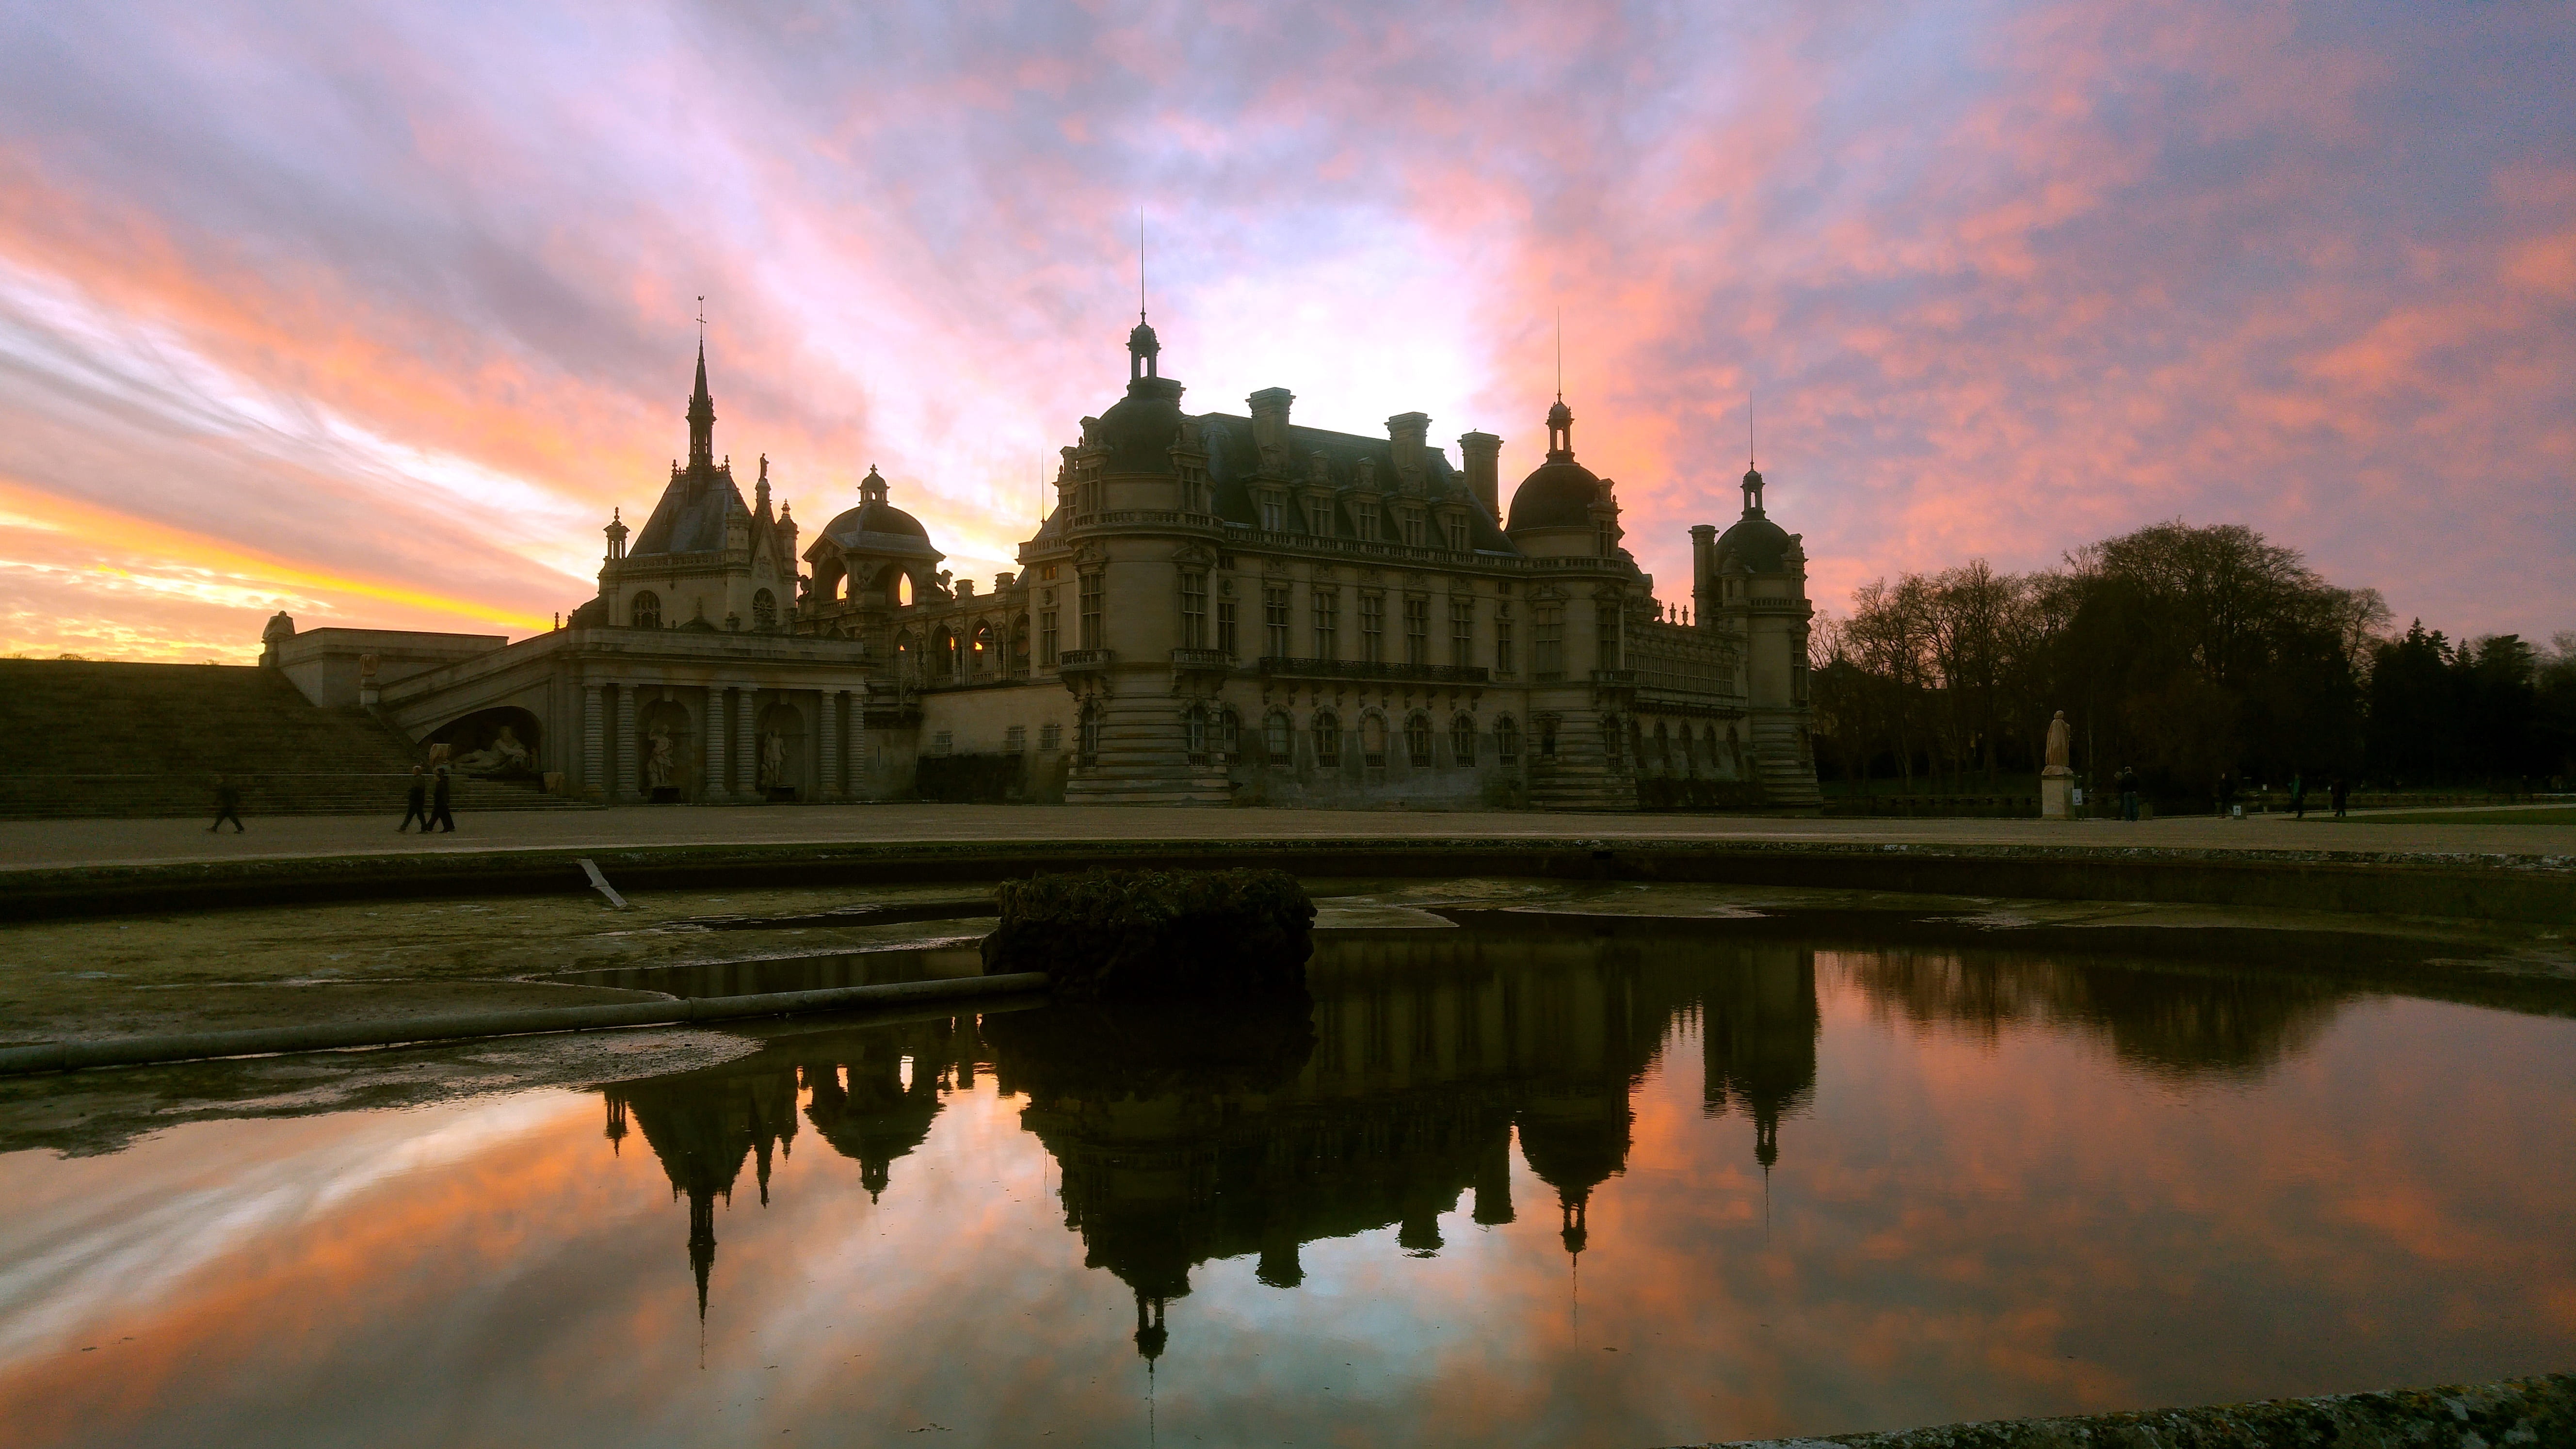 reflection photography of castle under golden hour, chantilly